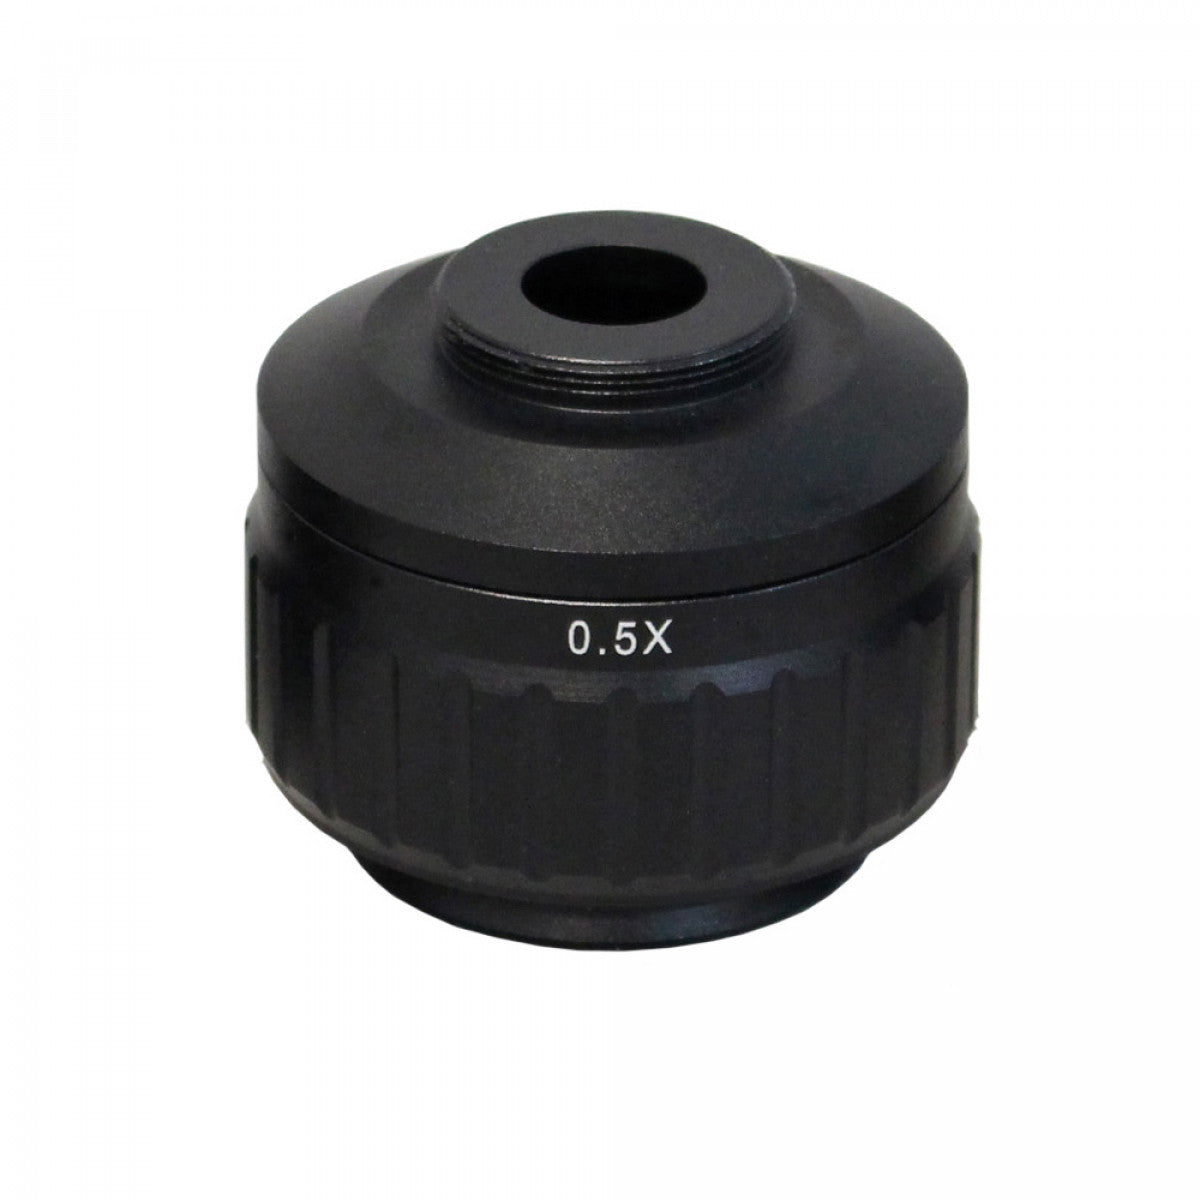 C-Mount Adapters for Accu-Scope EXC-350 Series